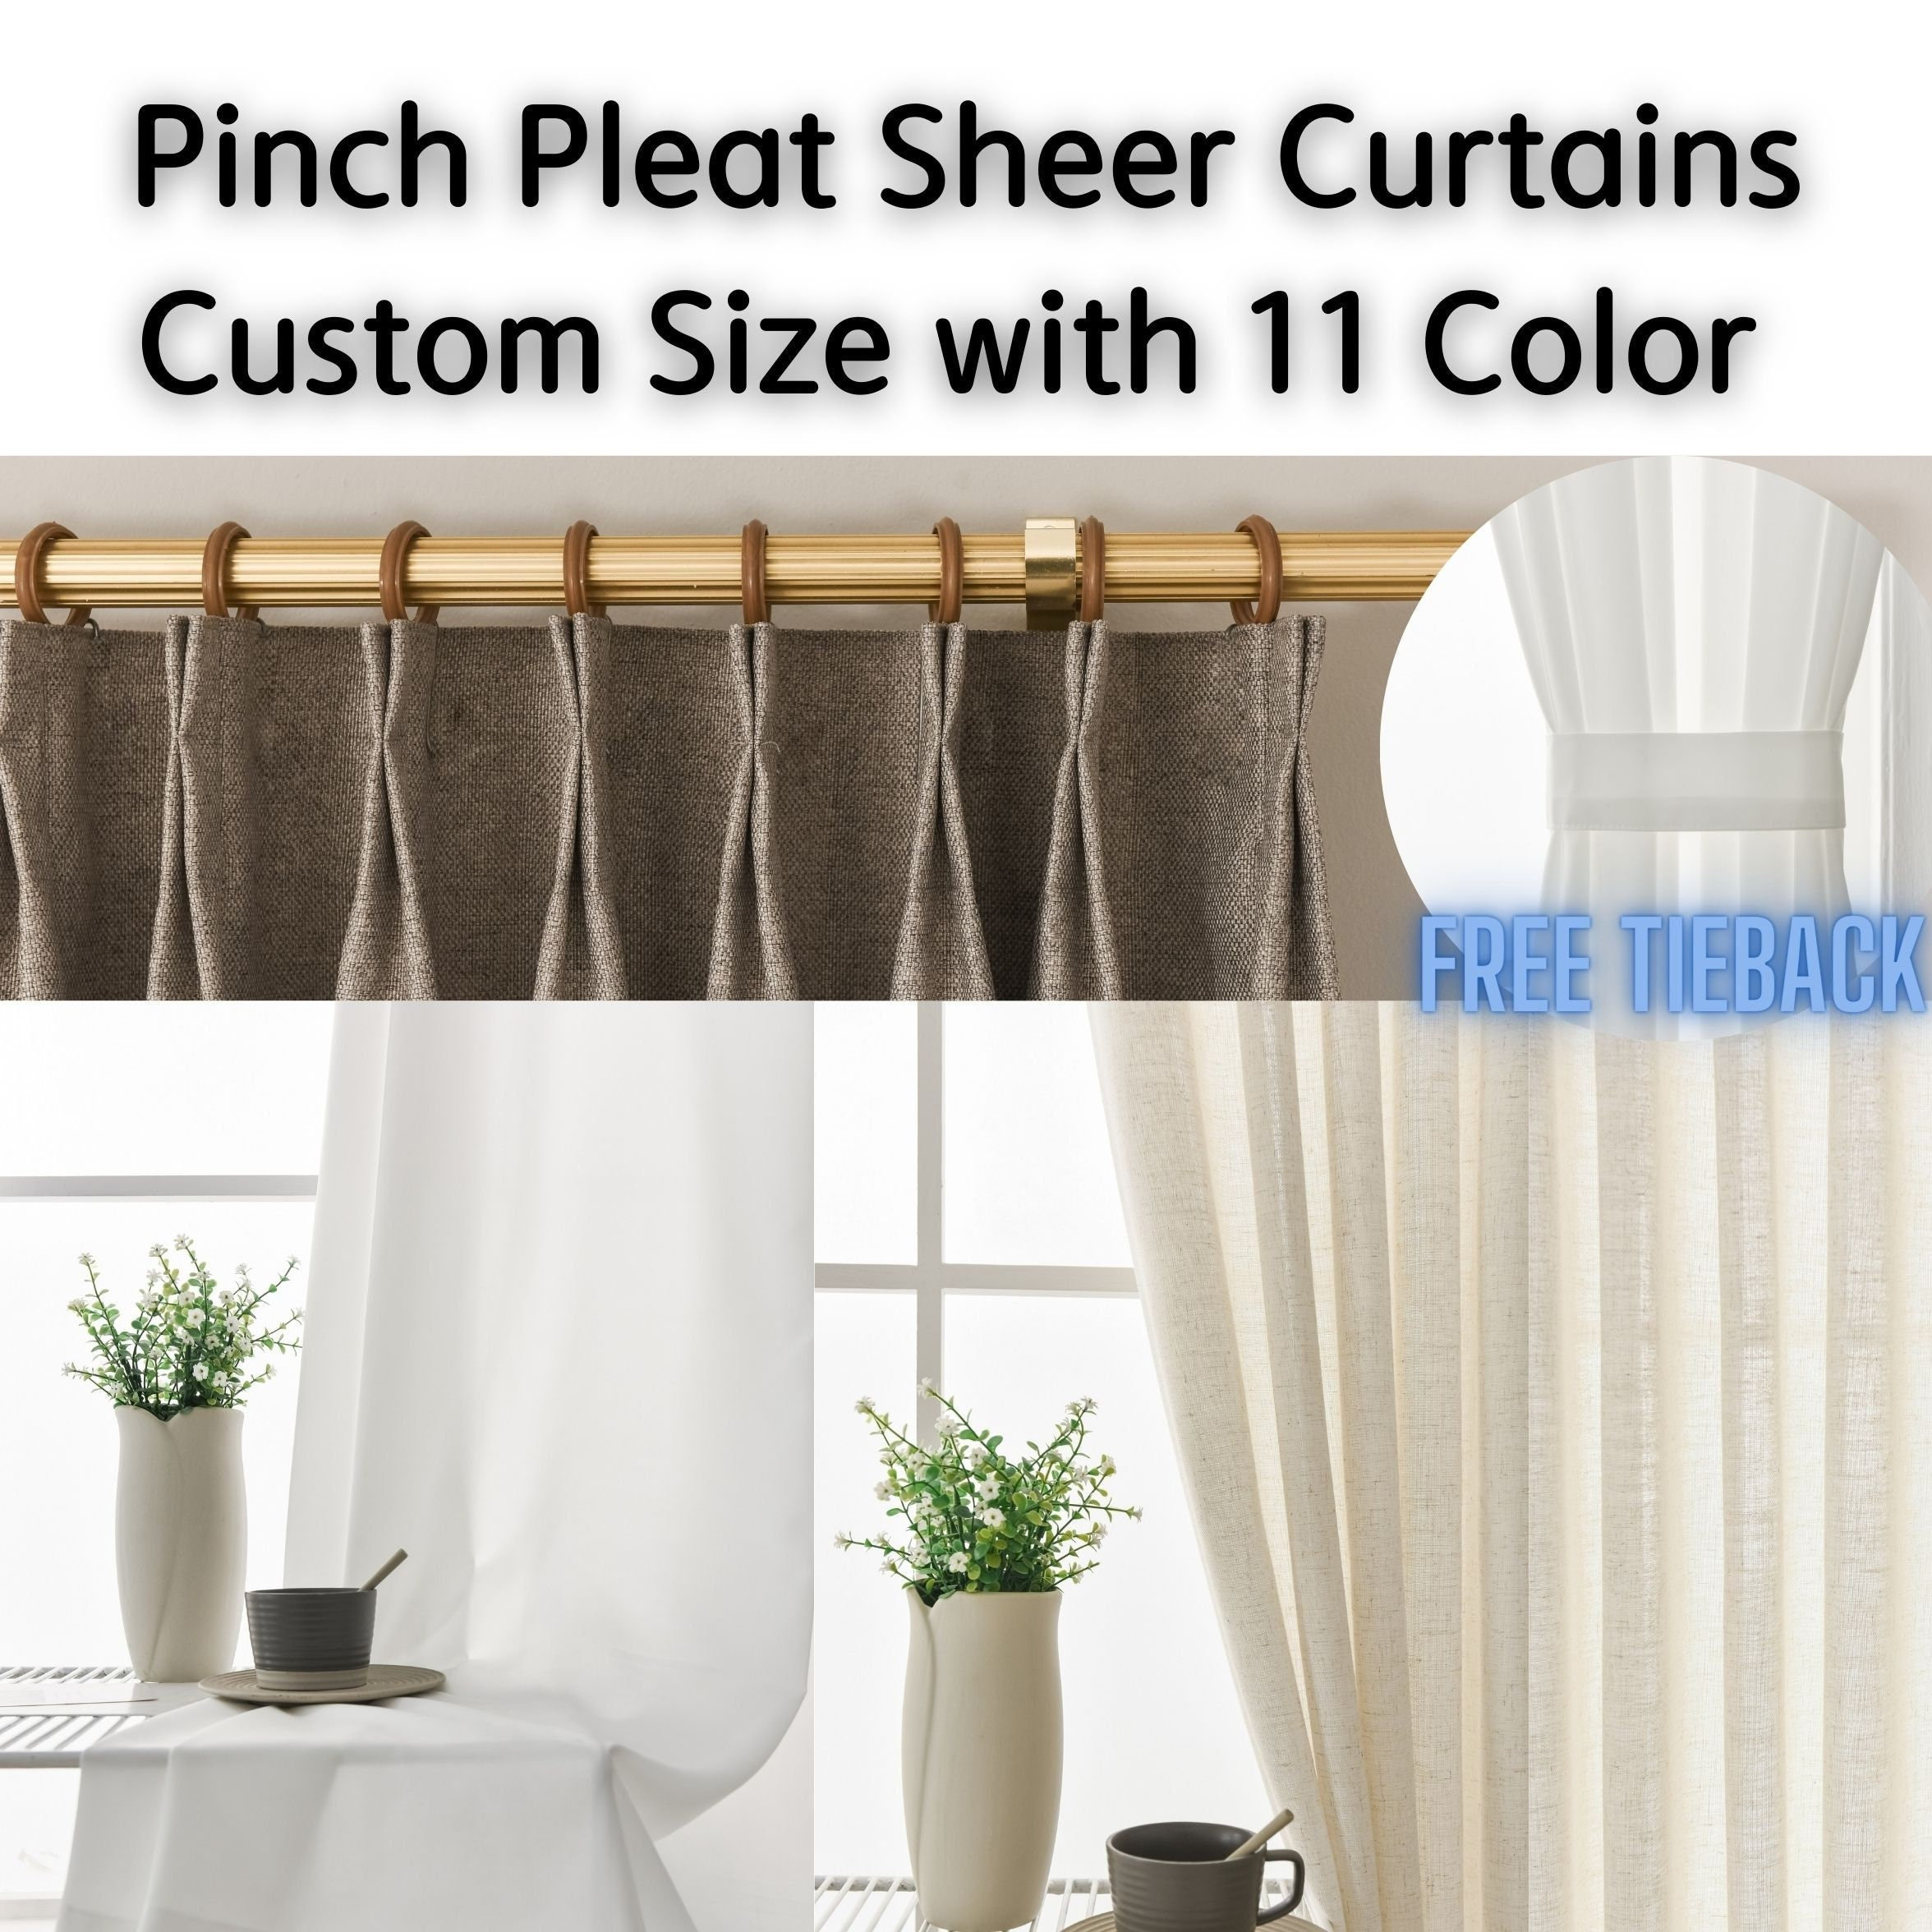 Pair of White Net Curtains, Voile Drapery Curtains, Window Sheers, off White  Sheer Curtains, Modern Sheer Curtain Panels, Custom Curtains 